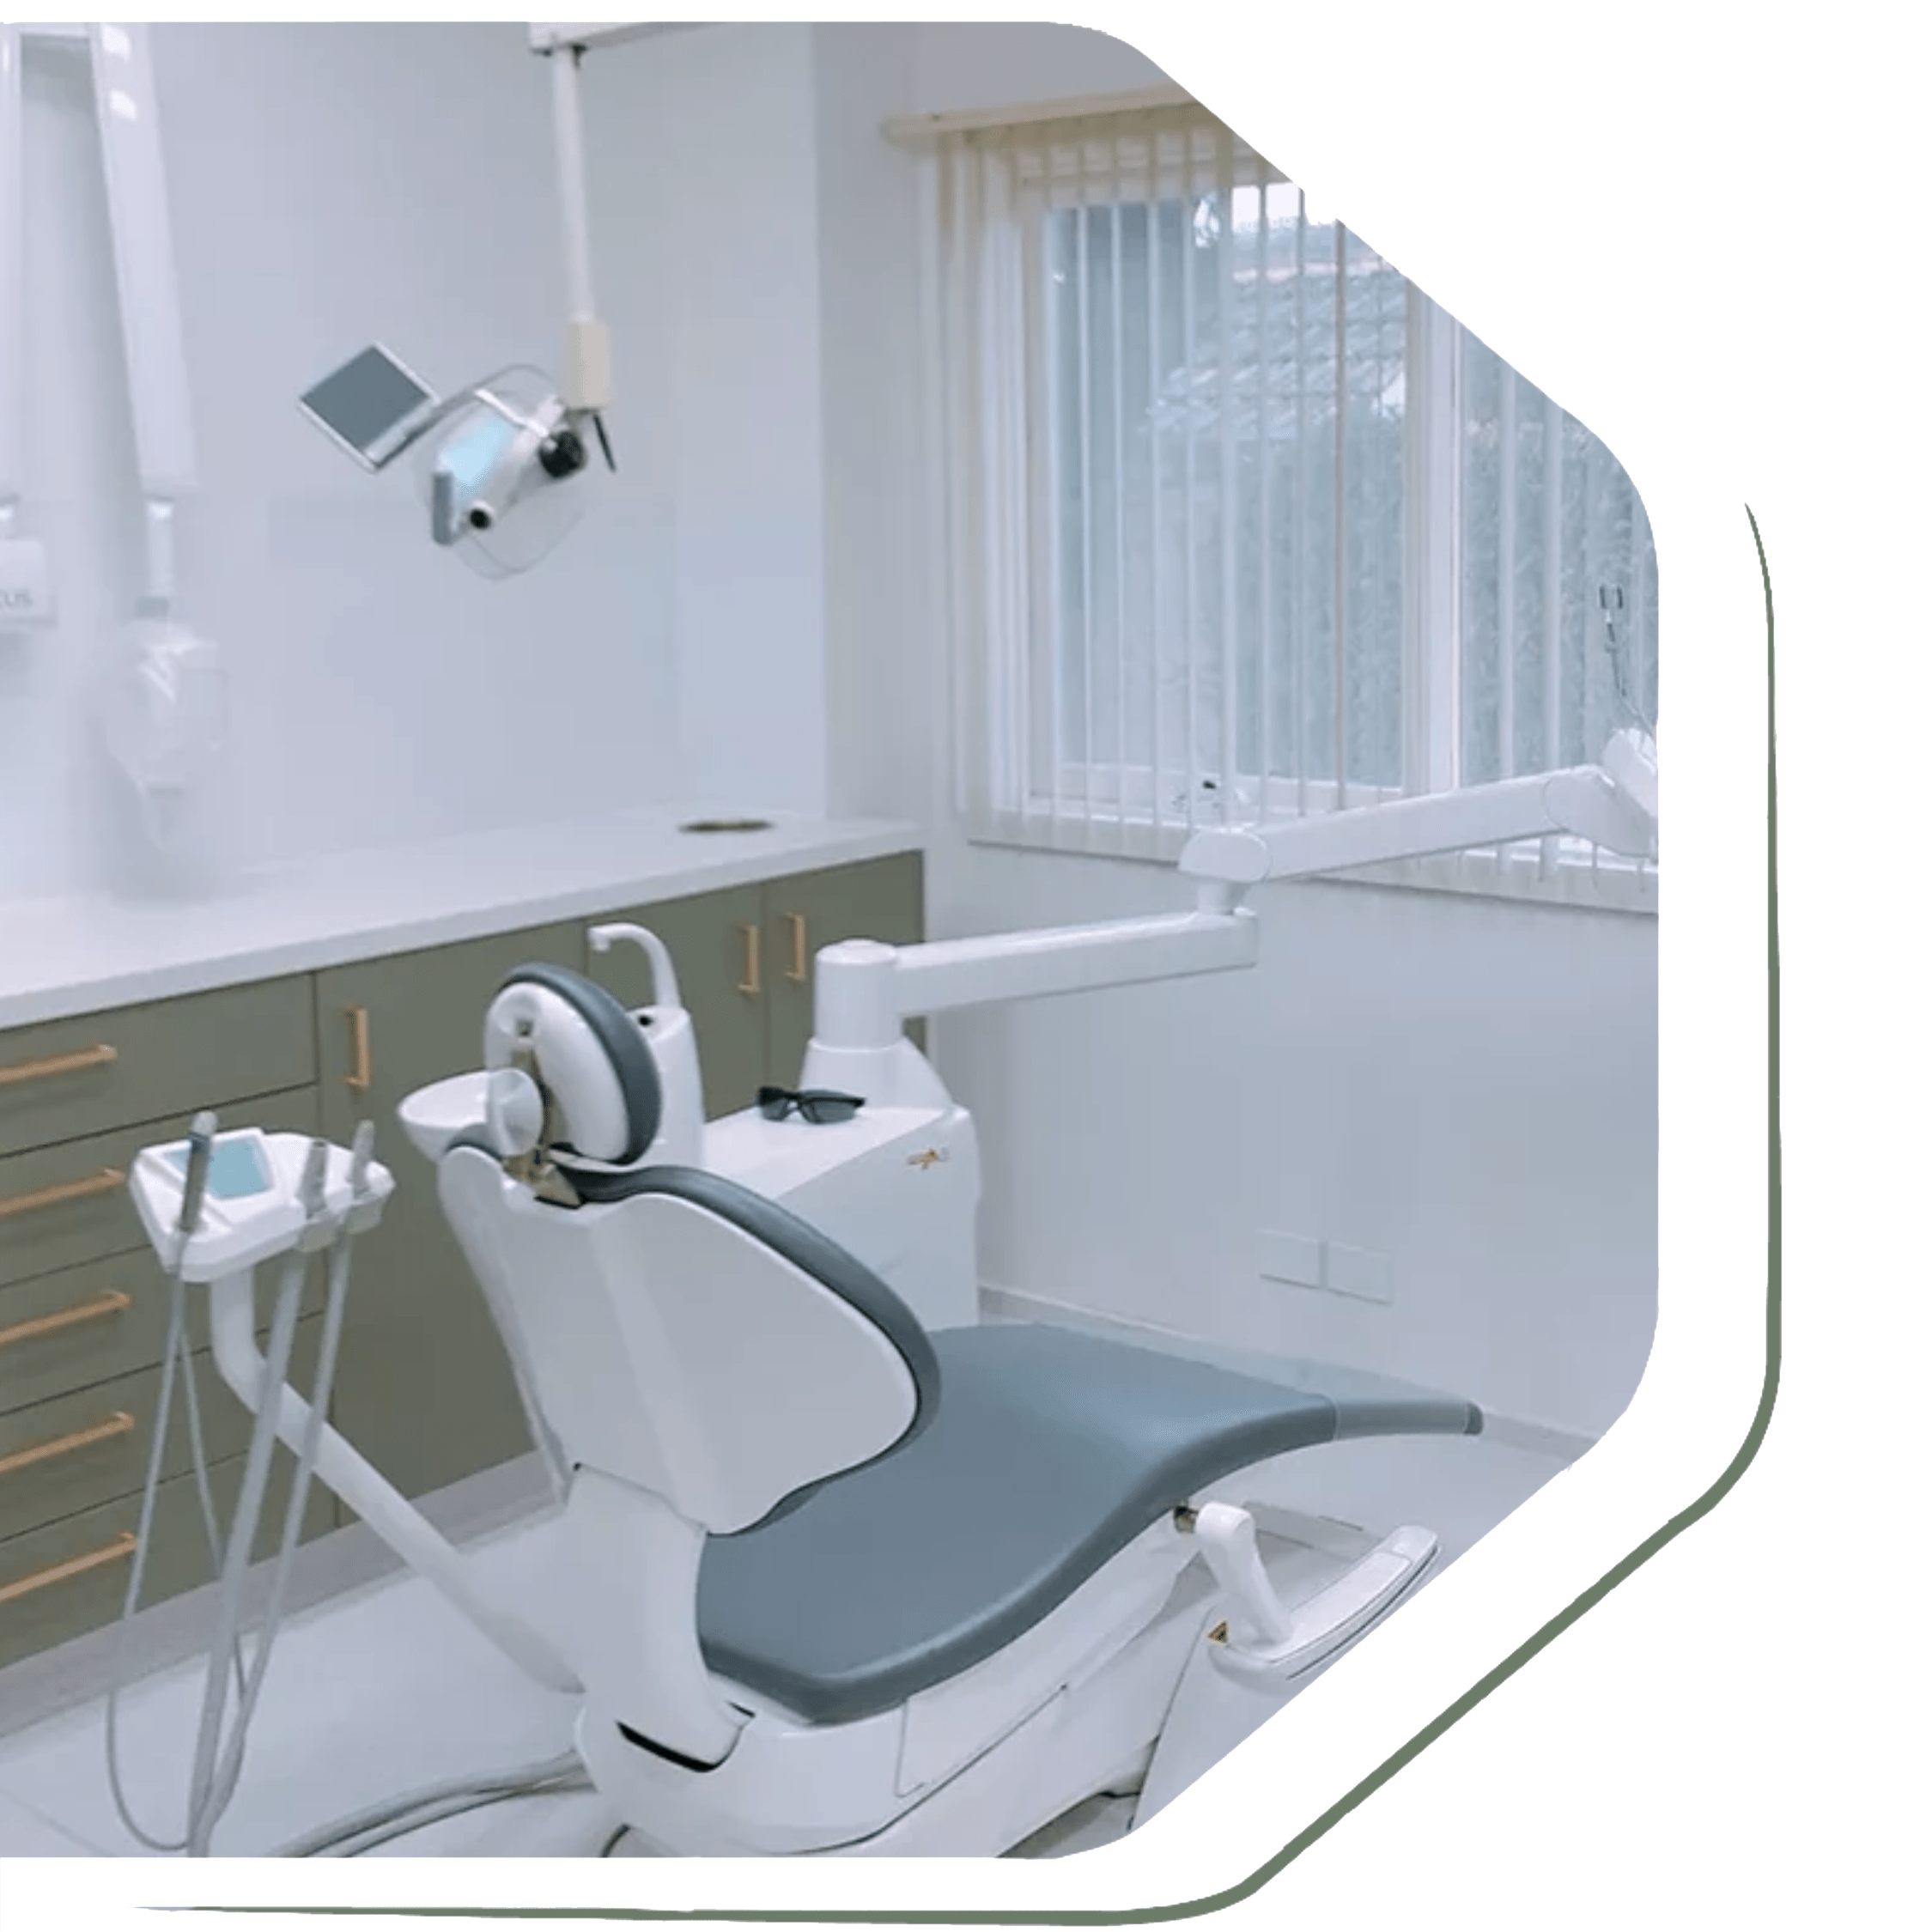 dental emergencies or issues recognized